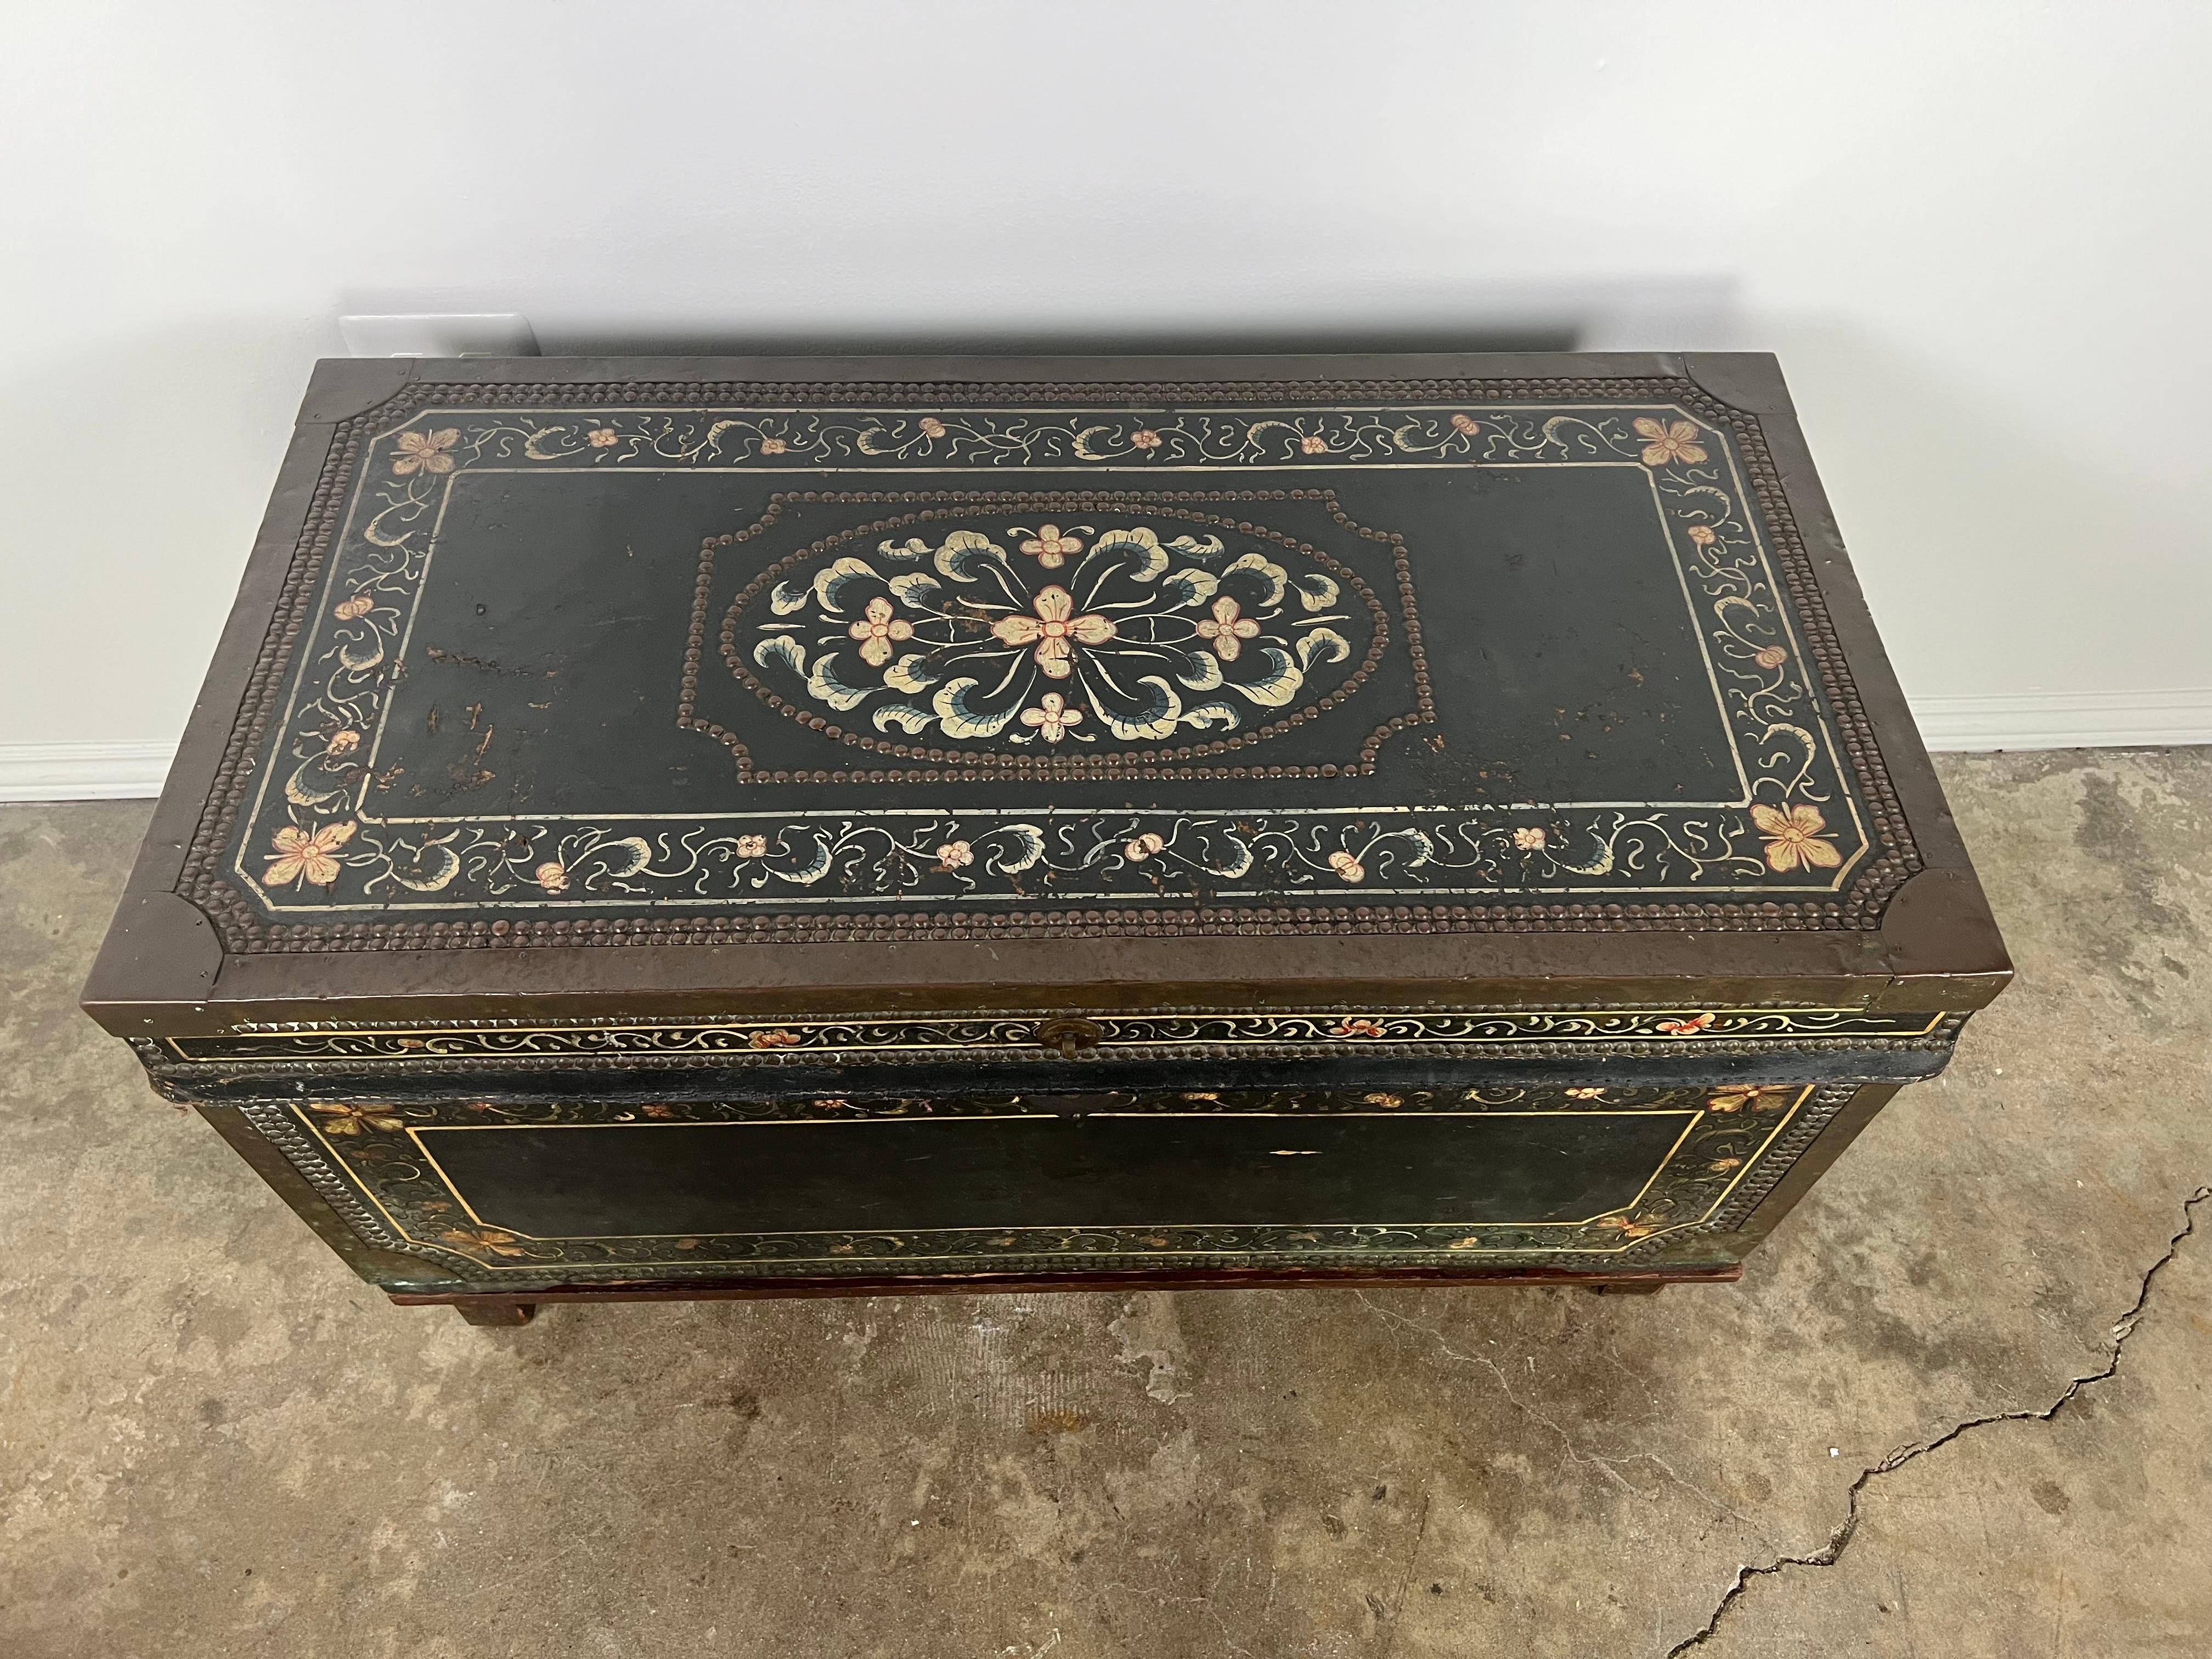 19th century Leather hand painted trunk. The paint detailing is beautifully done with rows of antique nailheads detailed throughout the trunk.